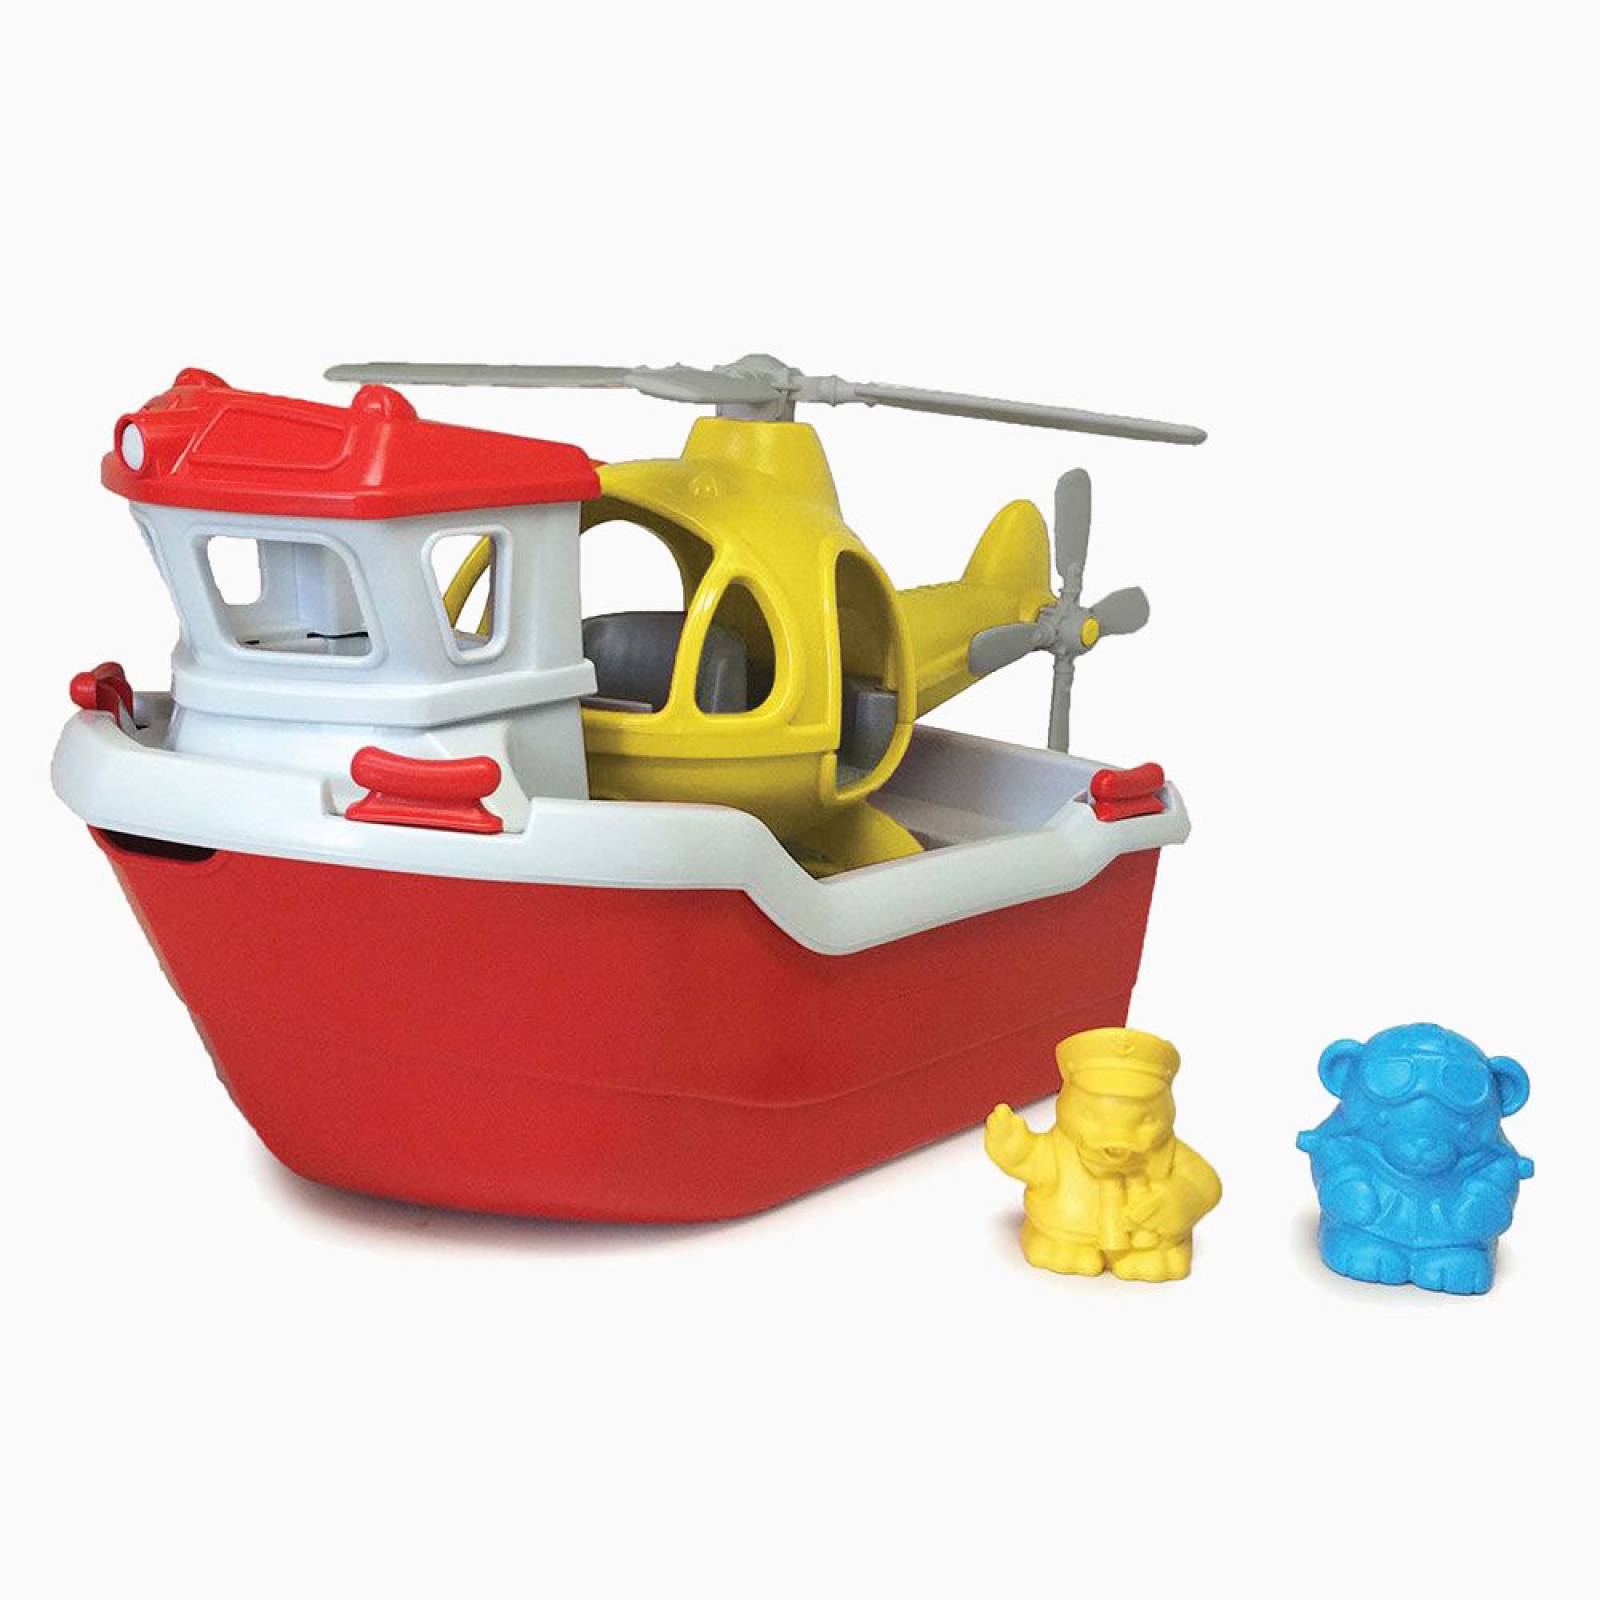 Rescue Boat & Helicopter By Green Toys 2+